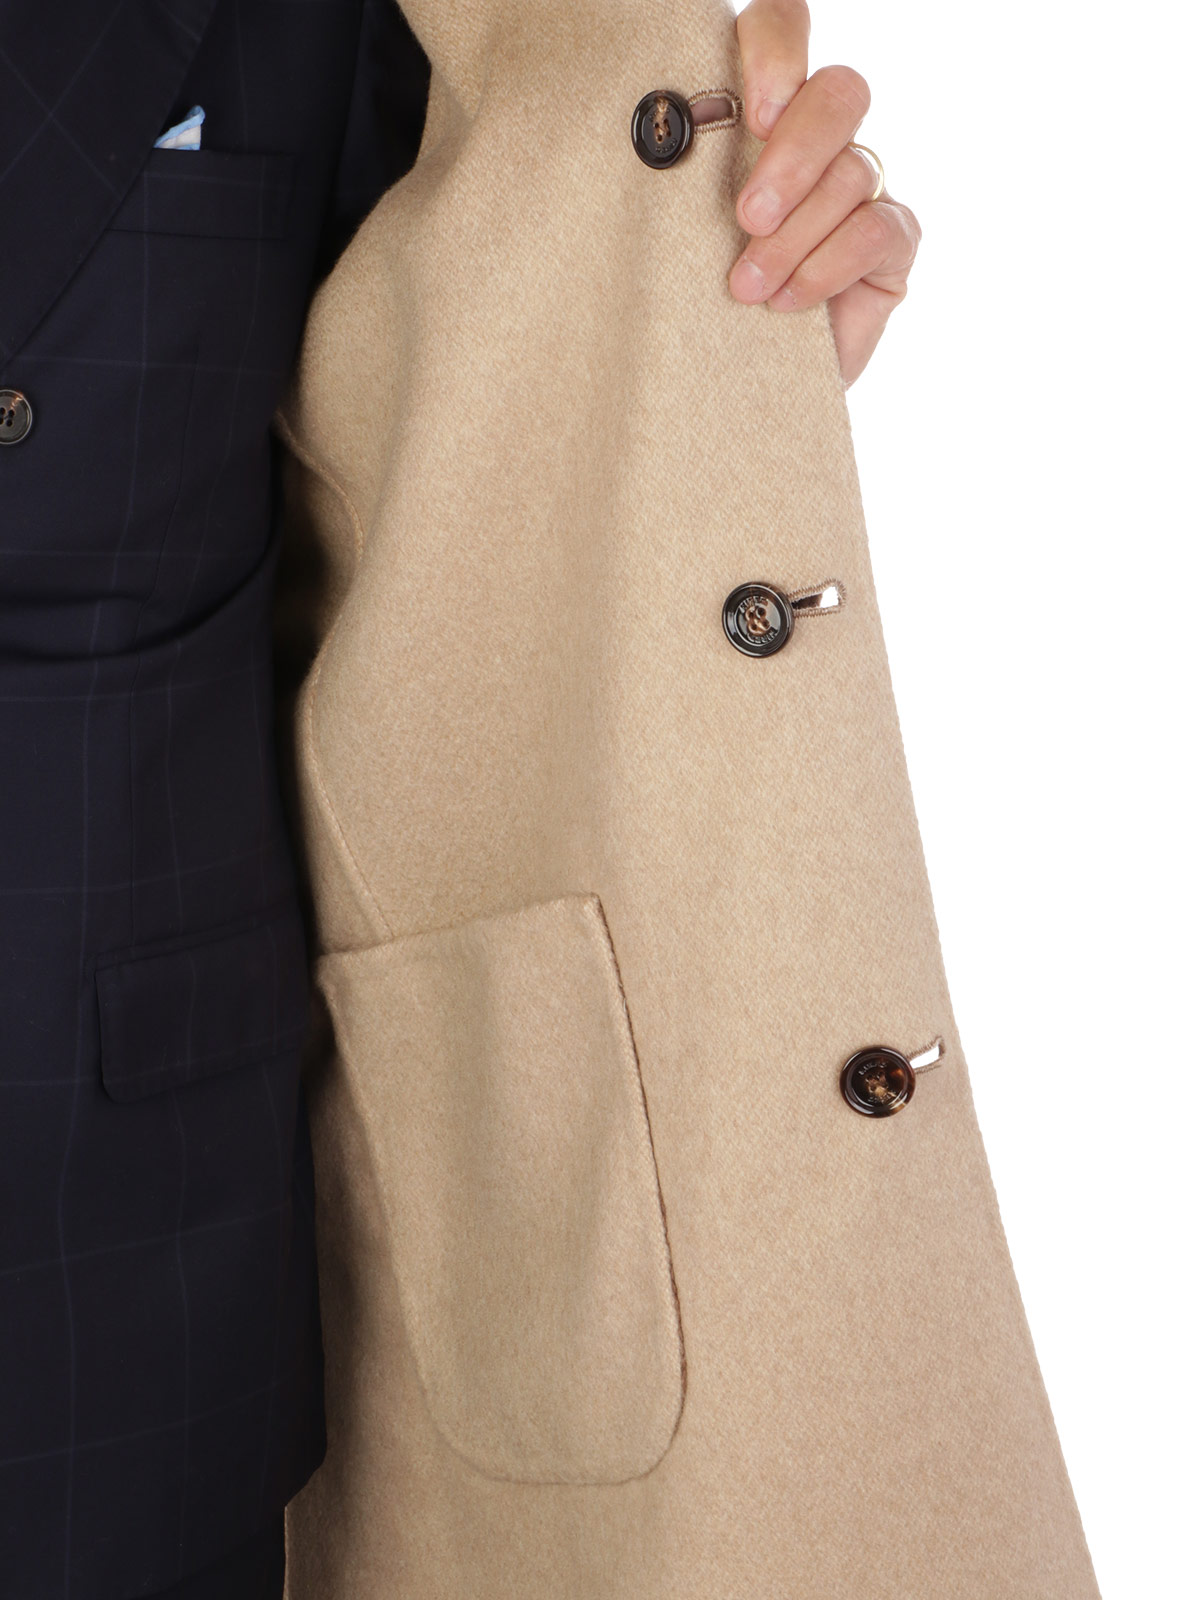 Picture of KIRED | Men's Reversible Cashmere Overcoat